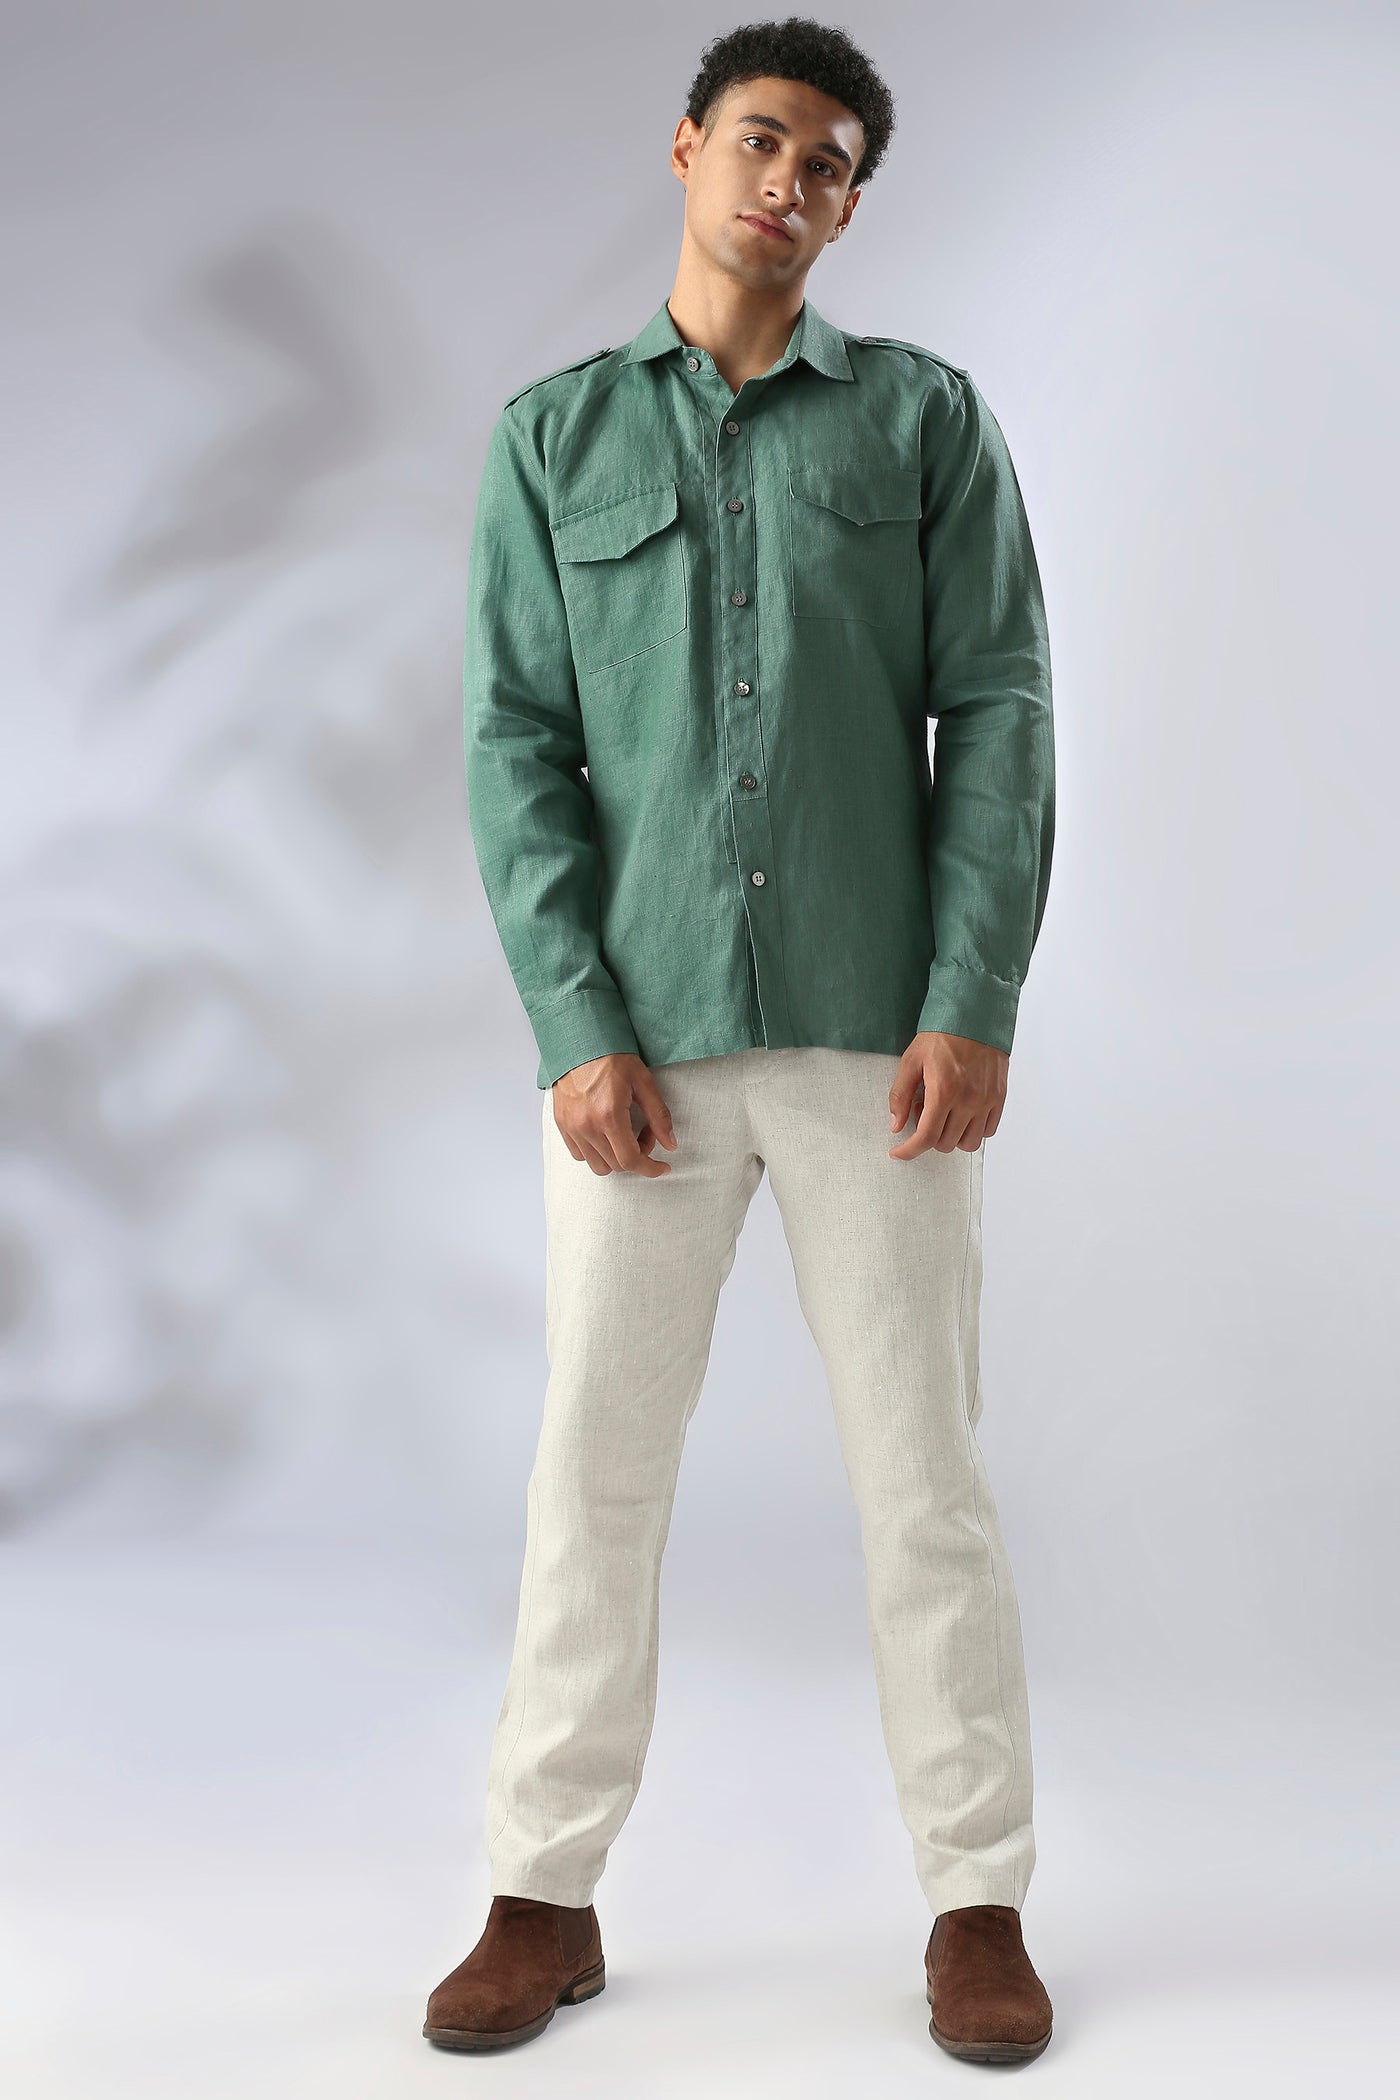 Sequoia Elbow Patch Shirt